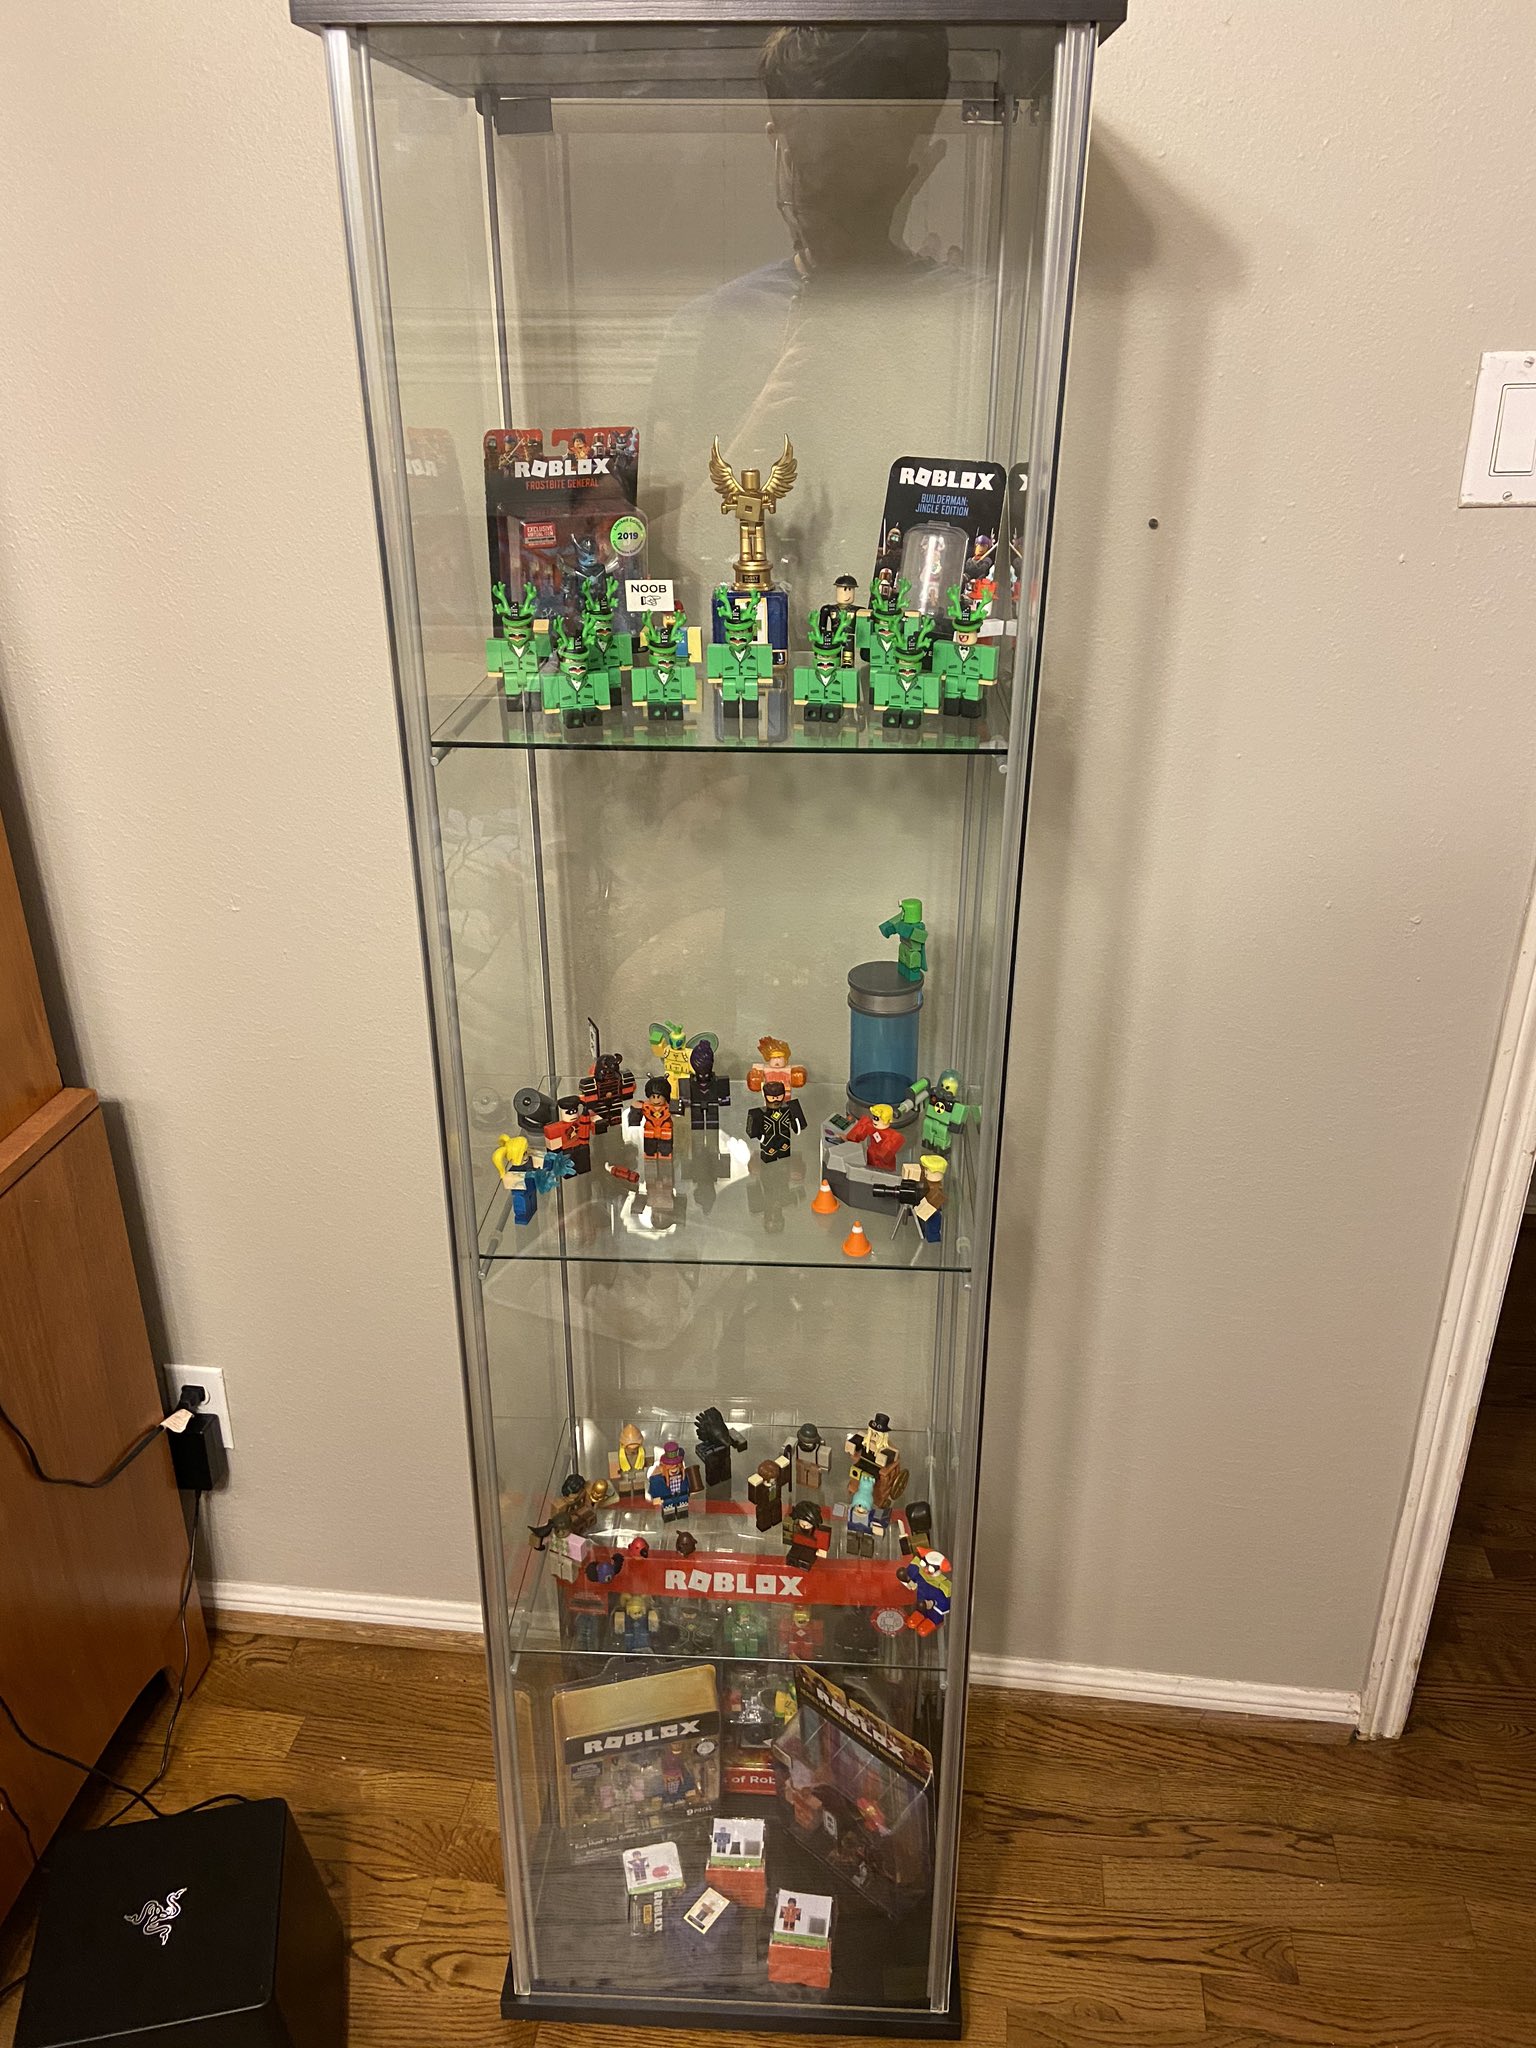 Luke Tesarek On Twitter Finally Got Some Free Time Last Night So My Sister And I Set Up This Display Case For All My Roblox Toys In My Room Https T Co Z8v712dlie - old shelf roblox